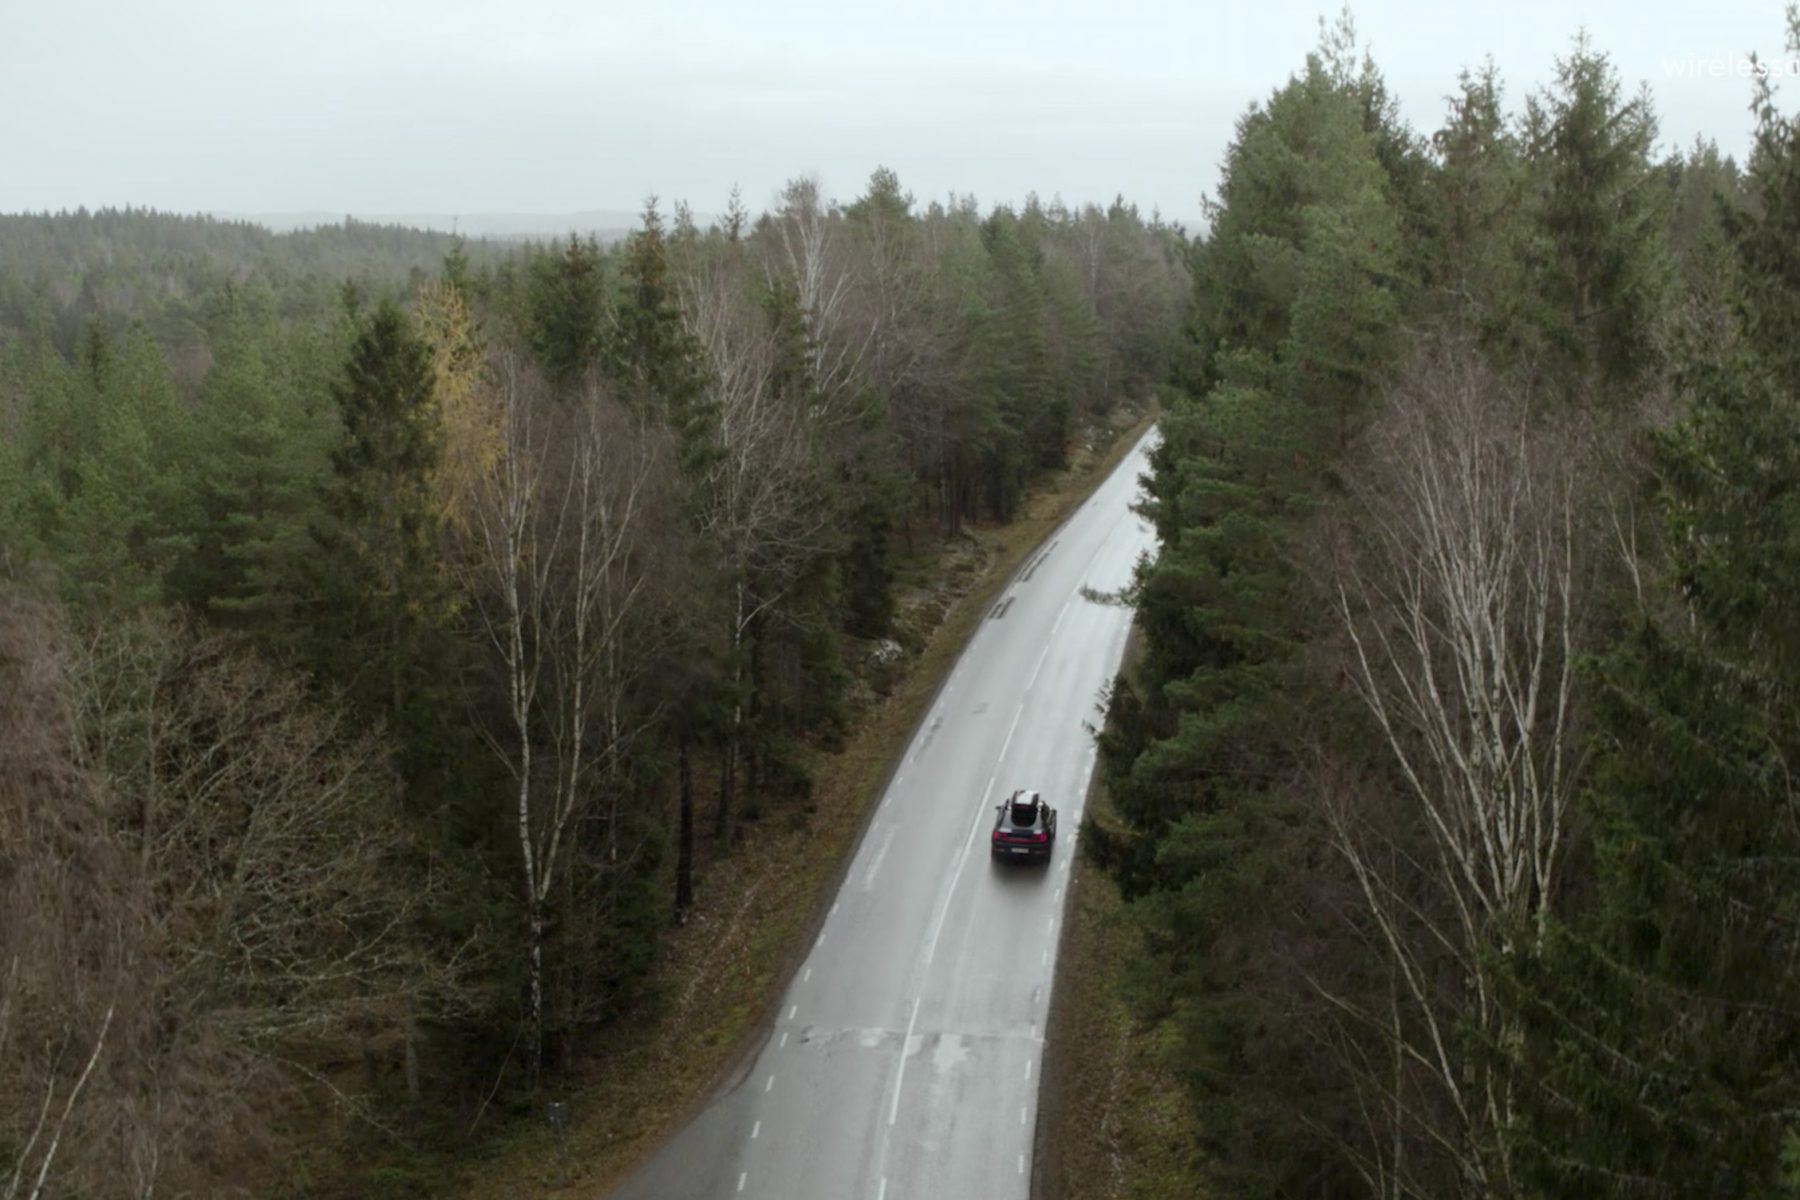 A car driving on a road surrounded by forrest